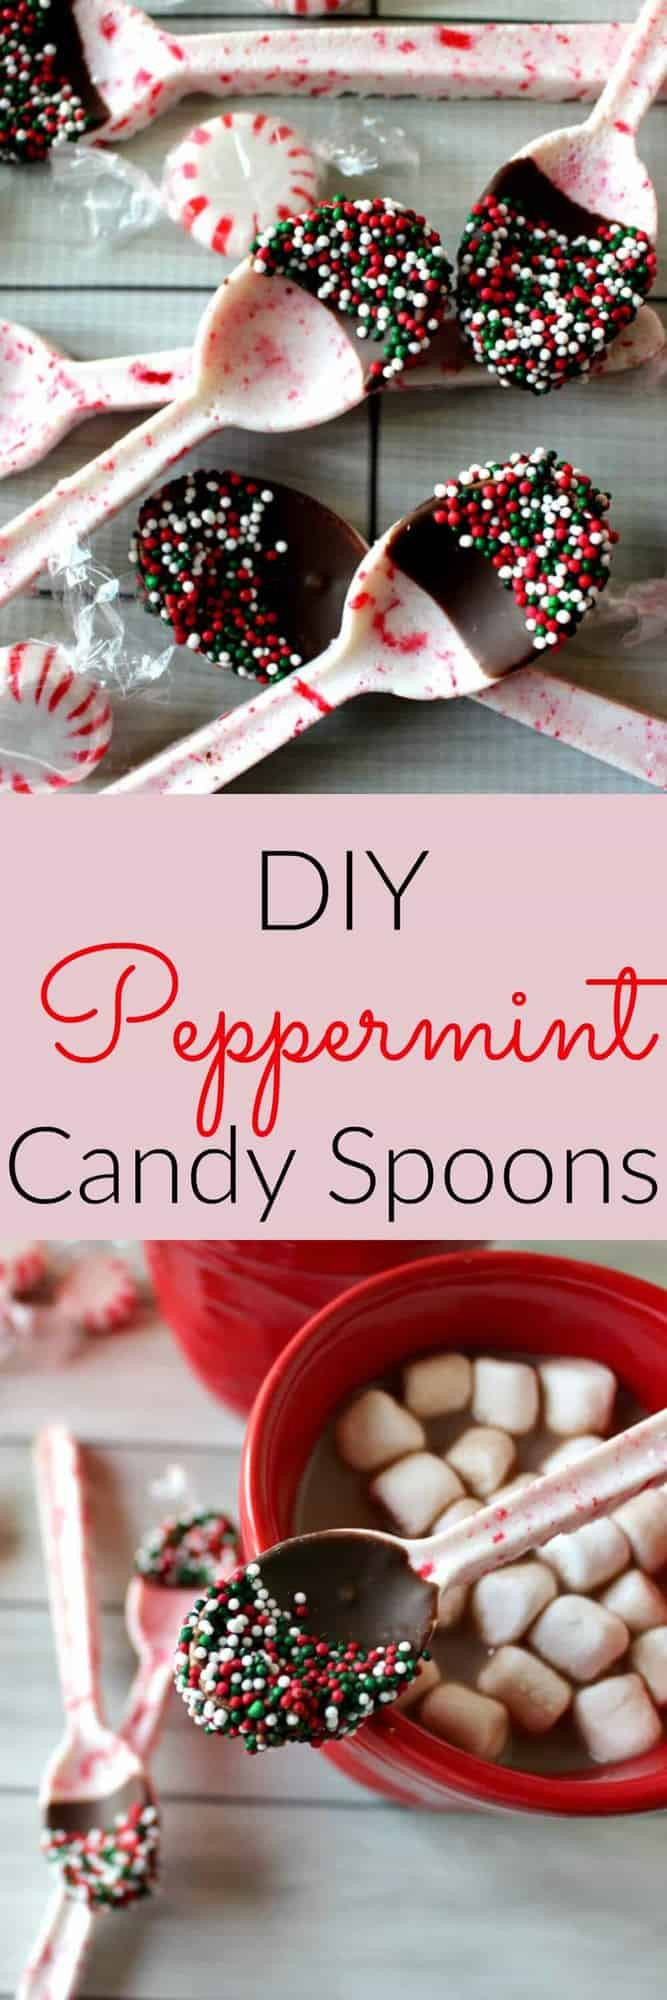 DIY Gifts For Christmas
 DIY Peppermint Candy Spoons Princess Pinky Girl